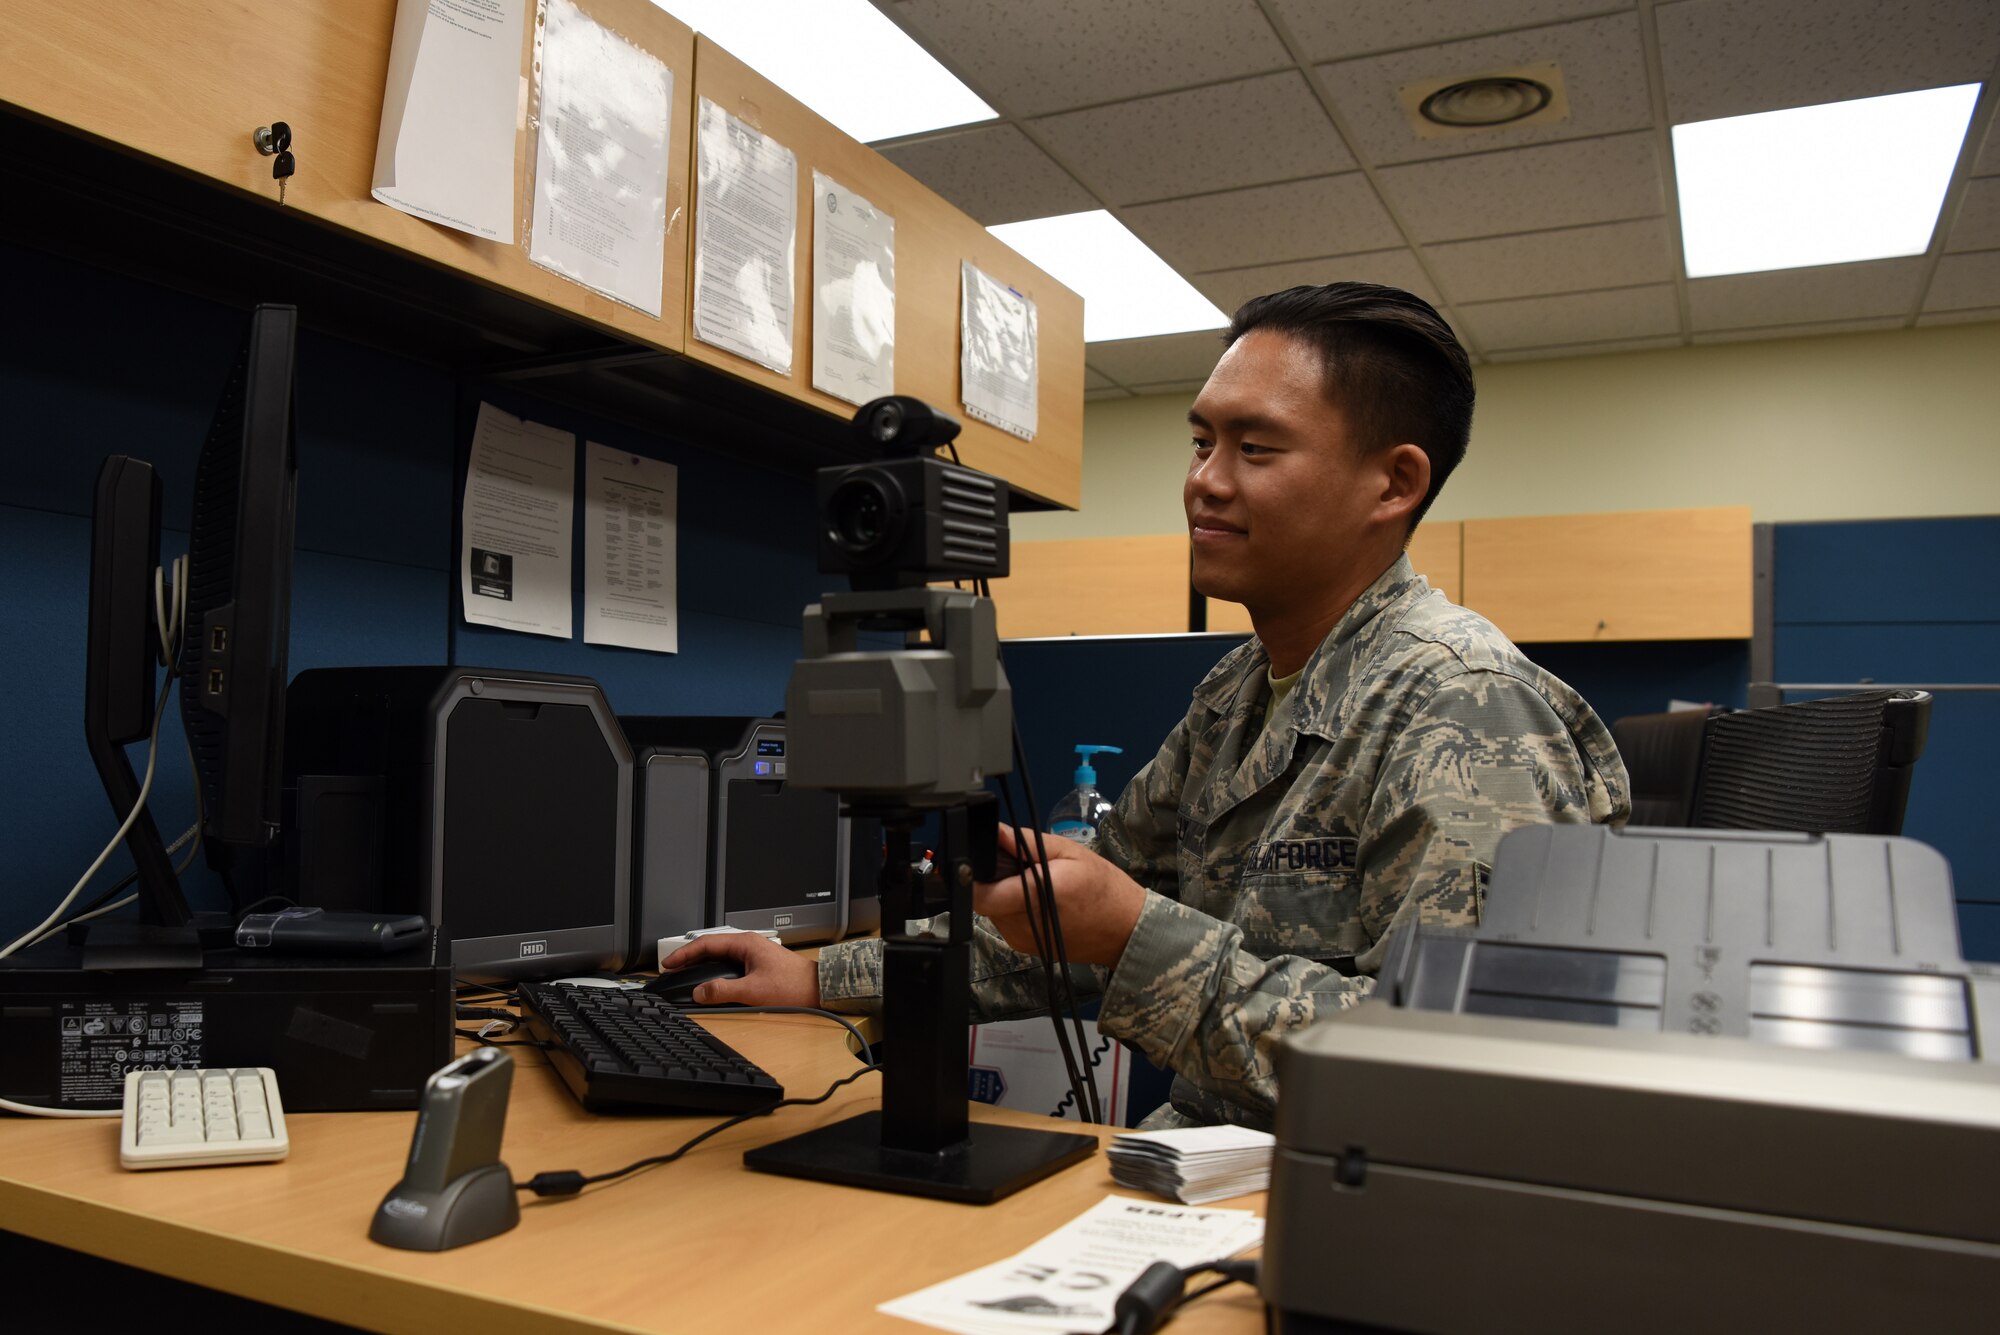 U.S. Air Force Staff Sgt. Daniel Ly, 8th Force Support Squadron customer support noncommissioned officer in charge, adjust a camera on his desk at Kunsan Air Base, Republic of Korea, Oct. 1, 2019. When Ly is not assisting customers with getting new common access cards and enrolling in the Korea Area Incentive Program, he likes to run to relieve his stress and stay in shape. (U.S. Air Force photo by Staff Sgt. Joshua Edwards)